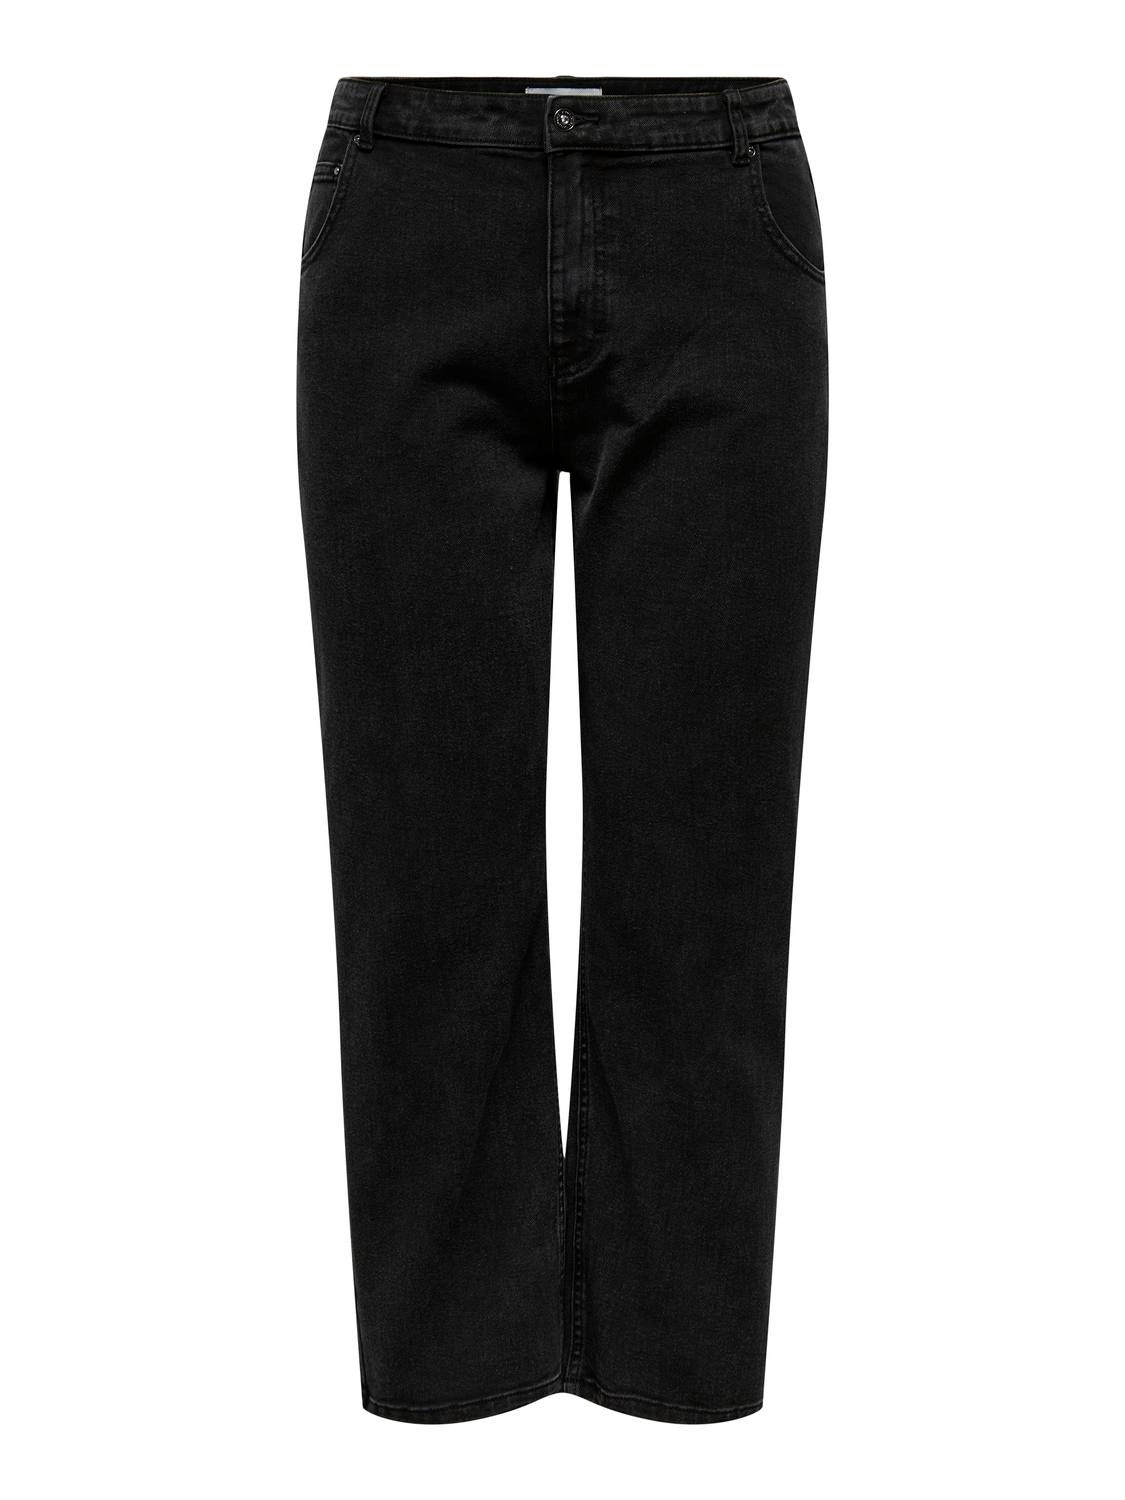 Black Denim Ladies Mom Fit Jeans, Button, High Rise at Rs 395